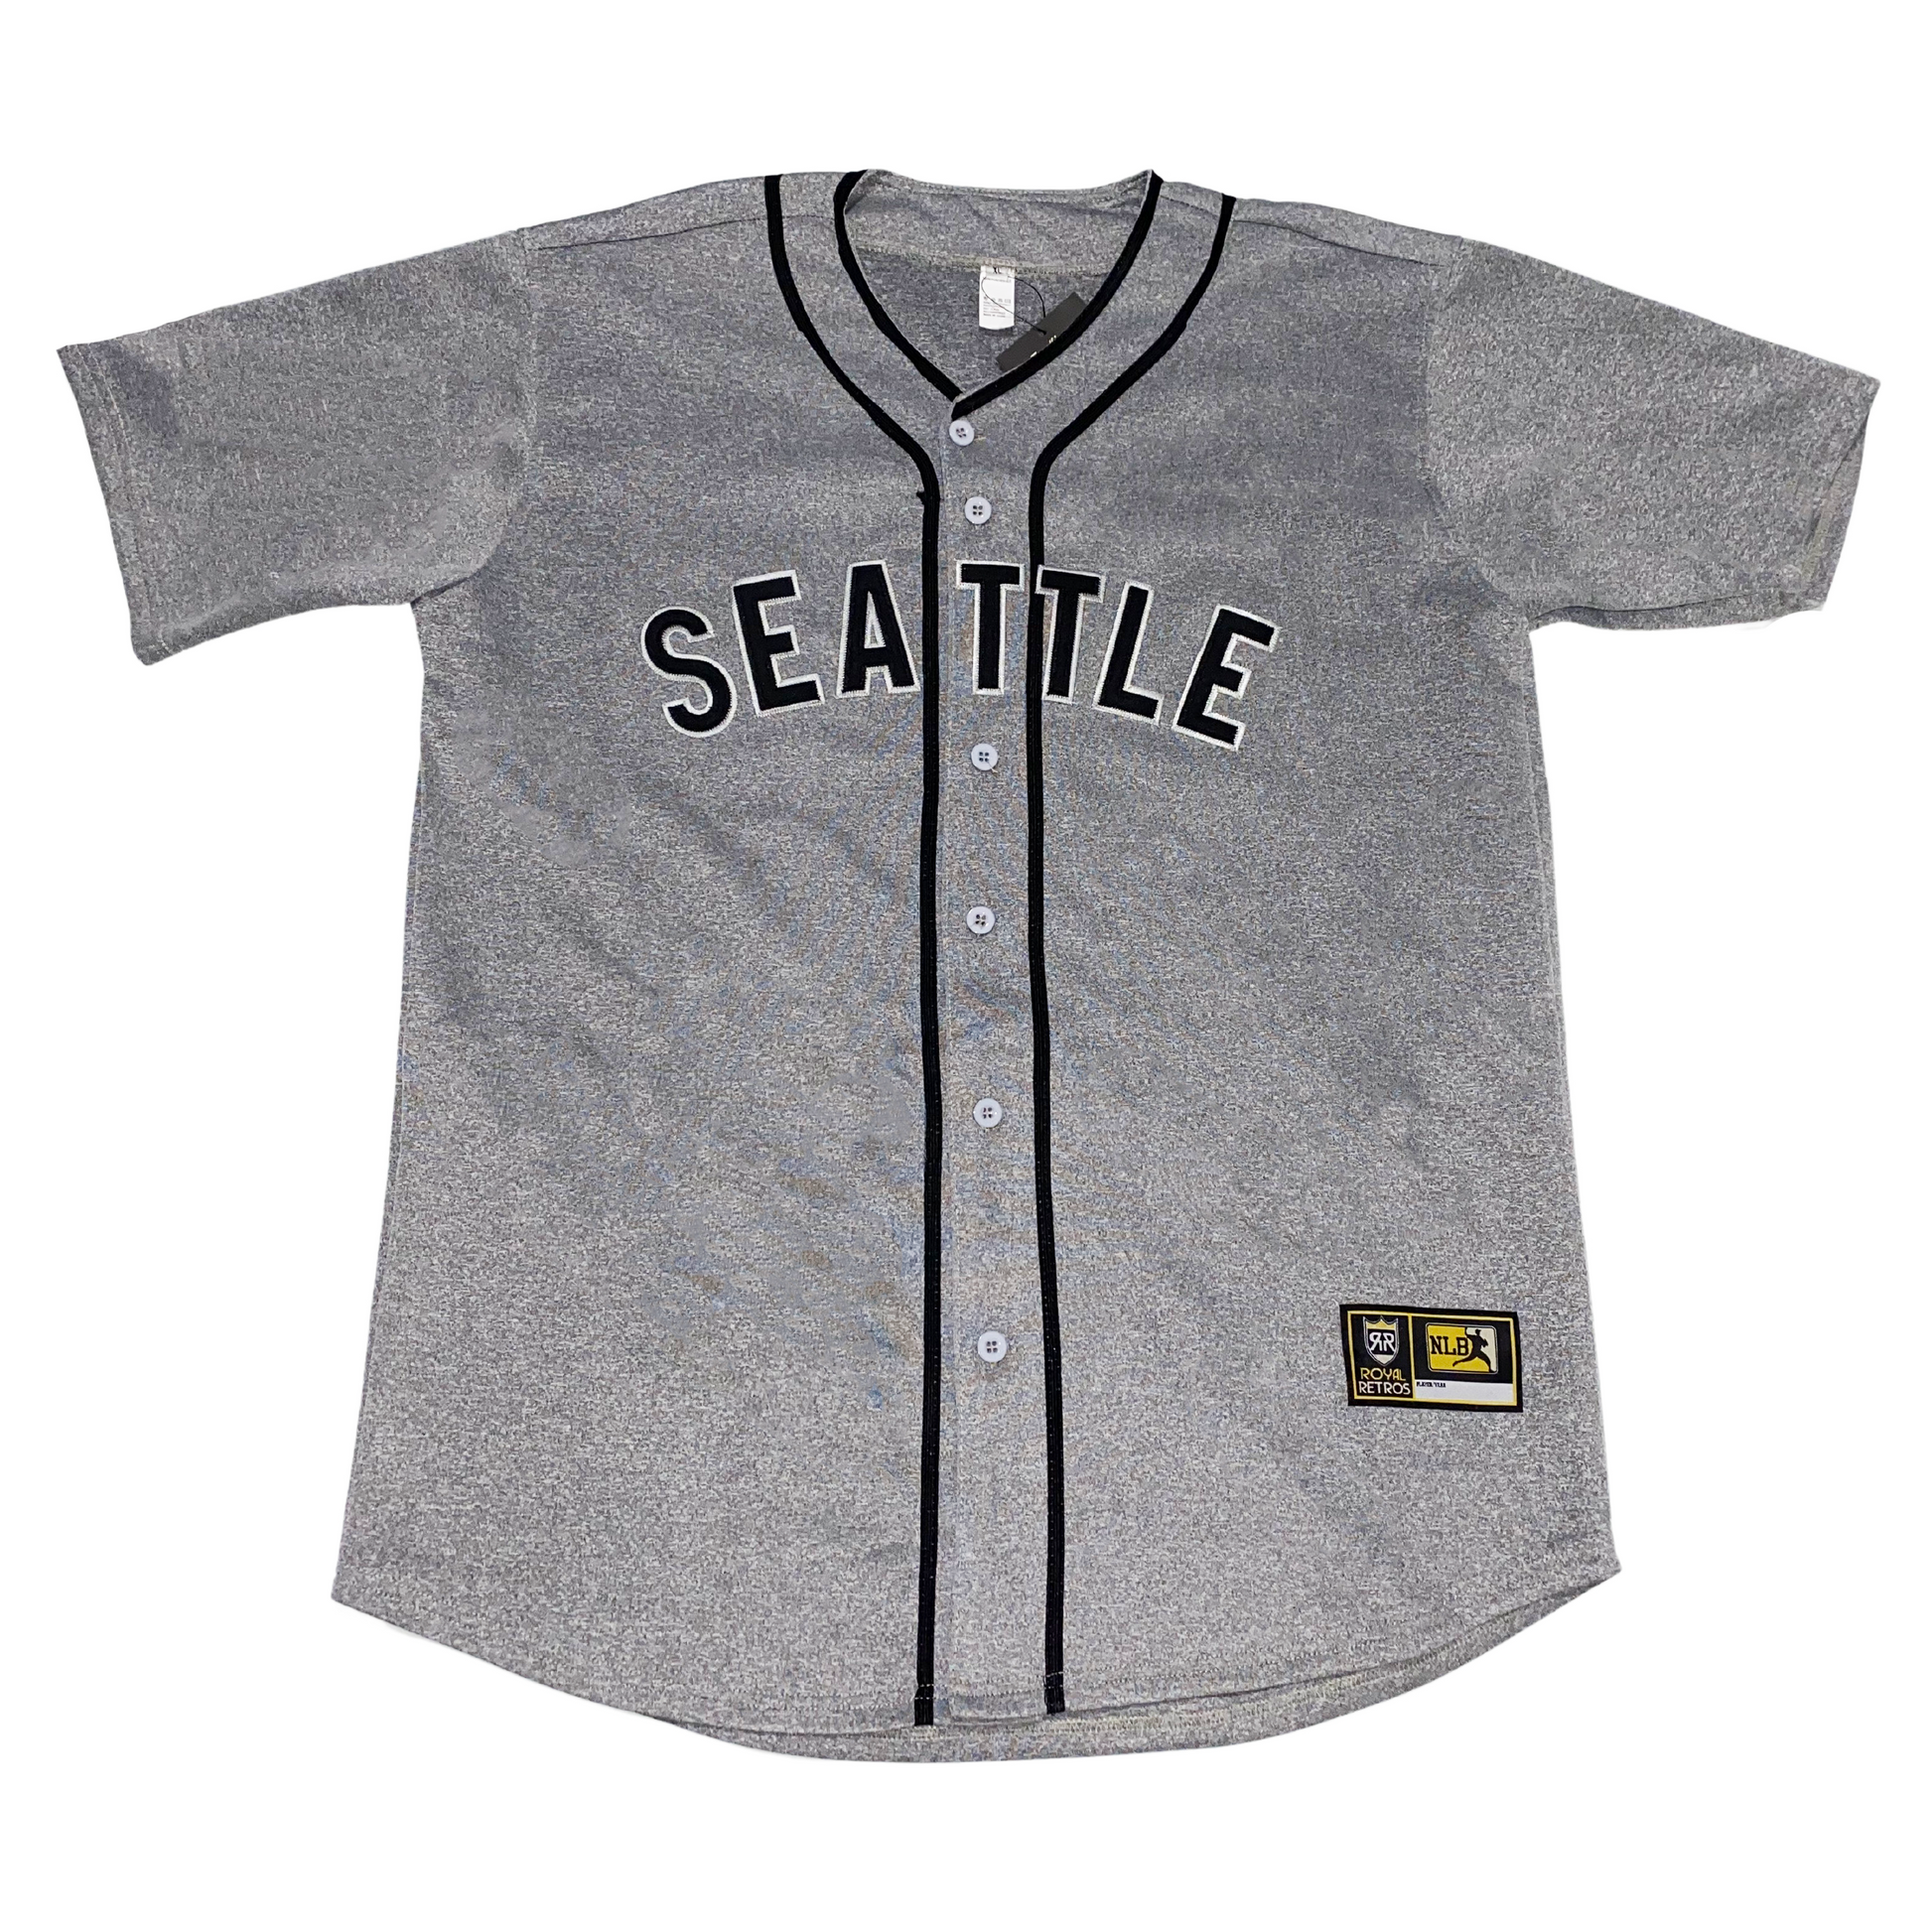 Buy Seattle Mariners Replica Jersey Home XL at Ubuy India